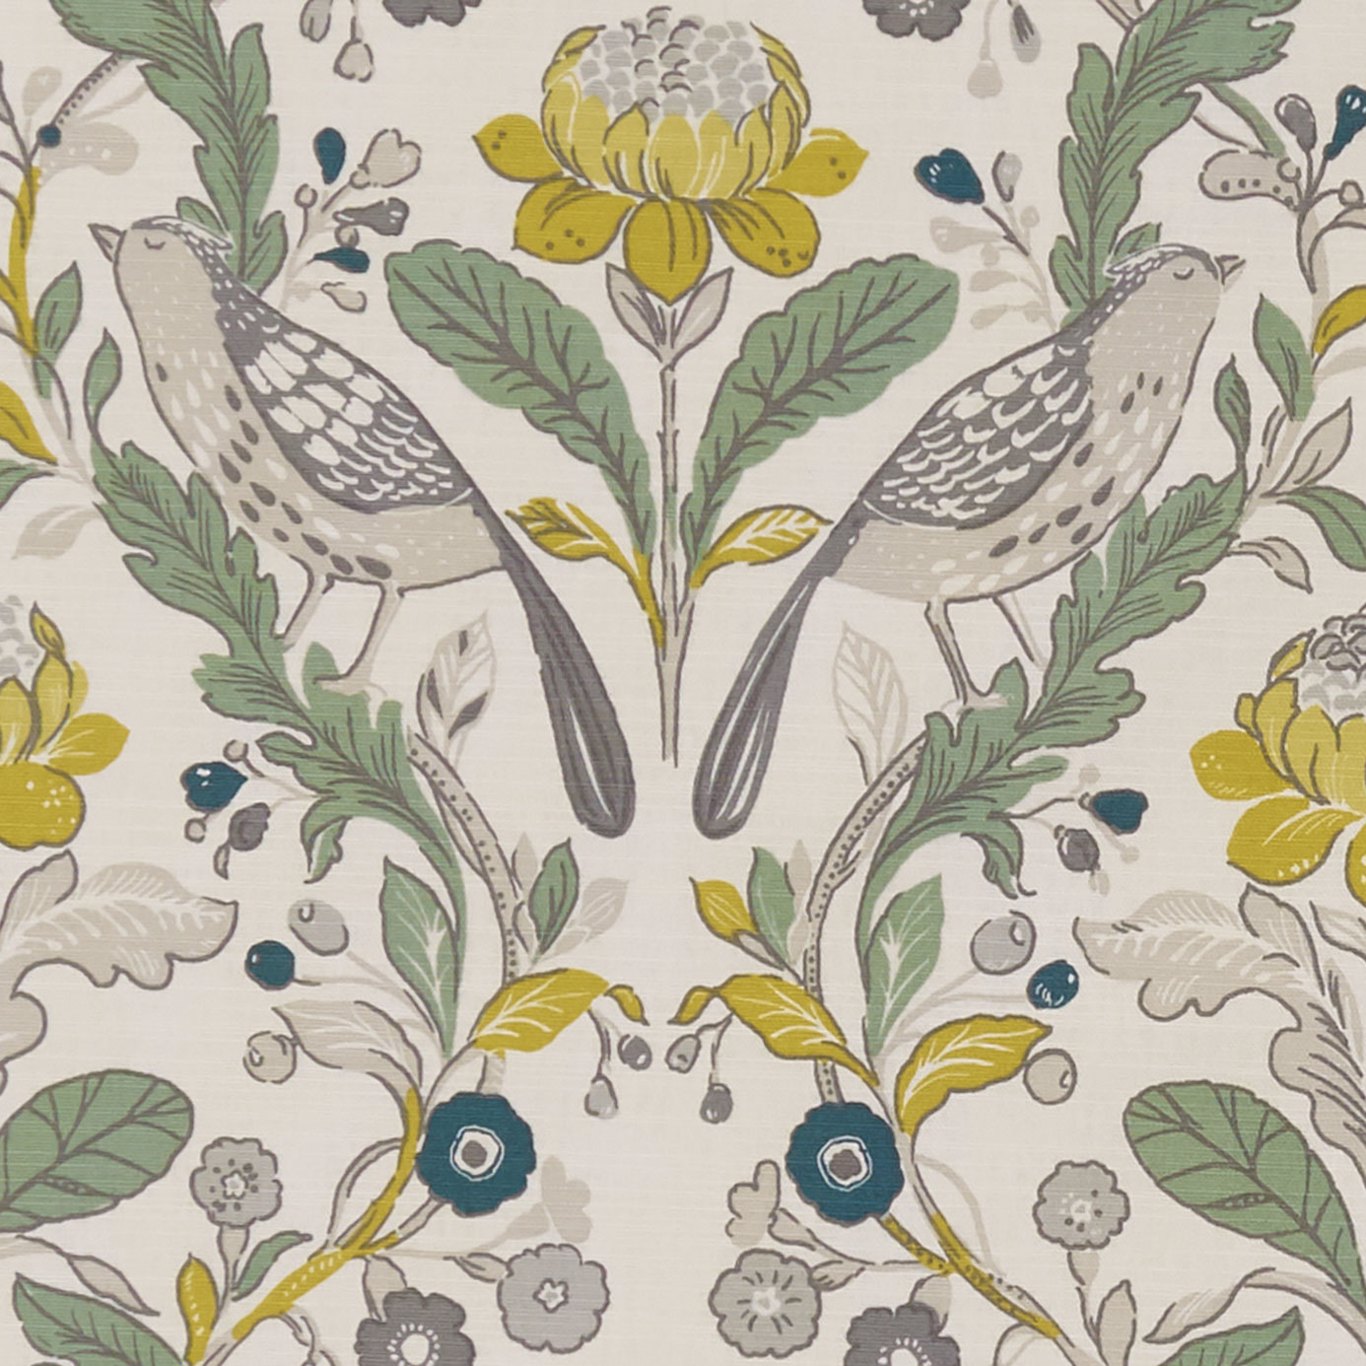 Orchard Birds Birds Forest/Chartreuse Fabric by STG